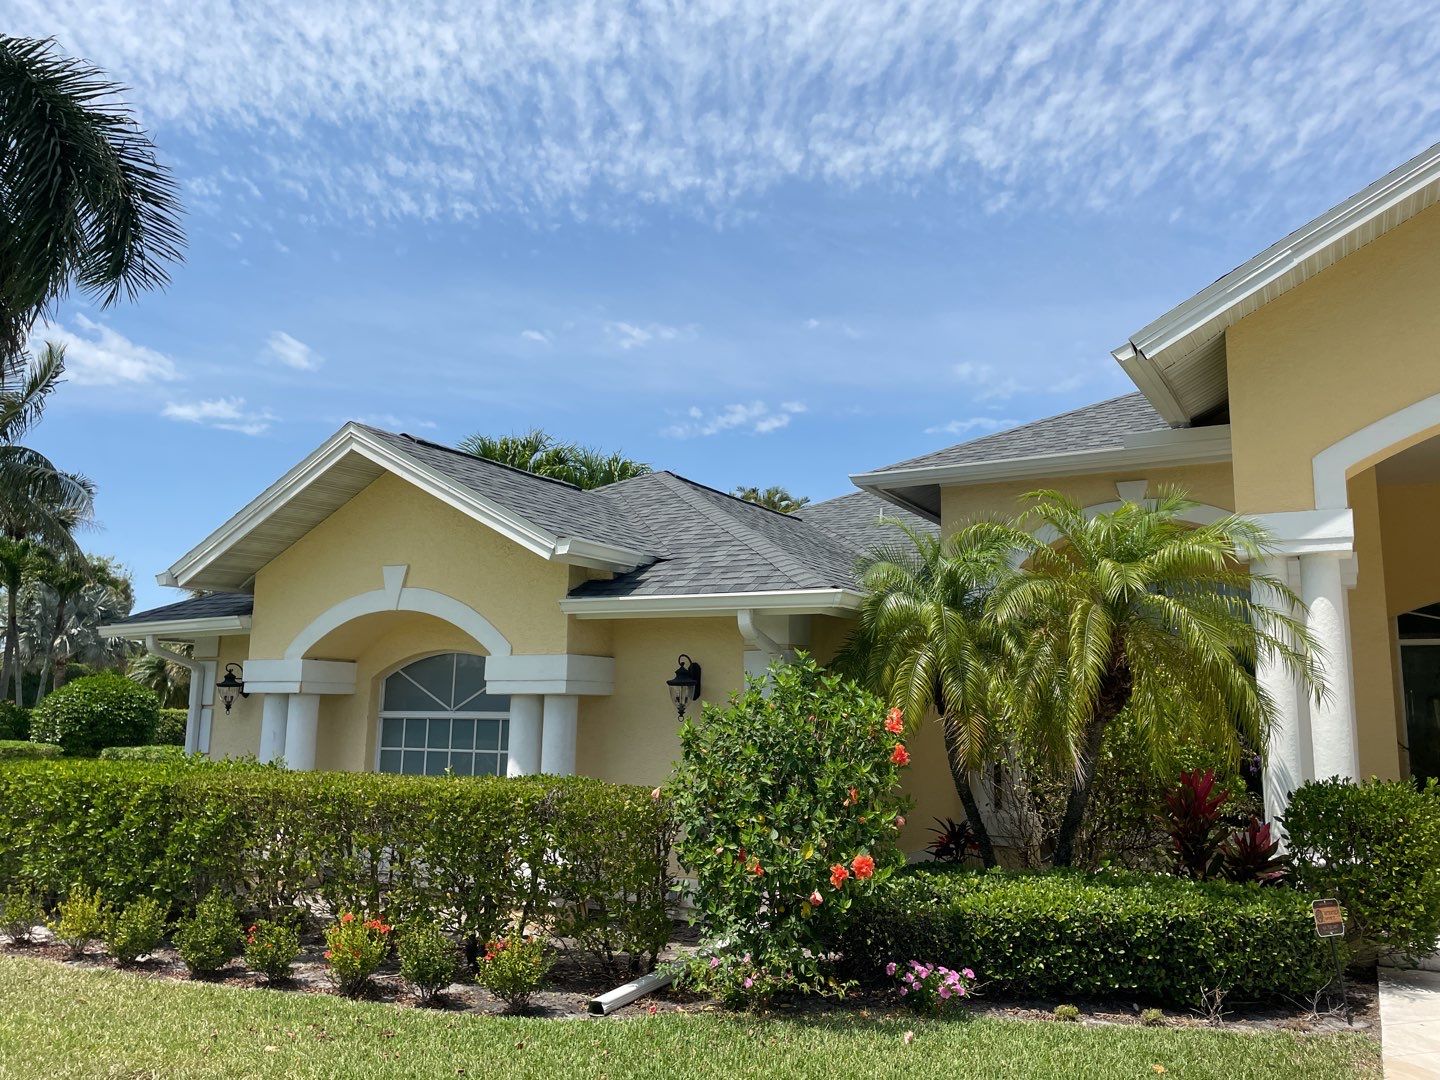 Reliable Roofing Services In North Fort Myers FL